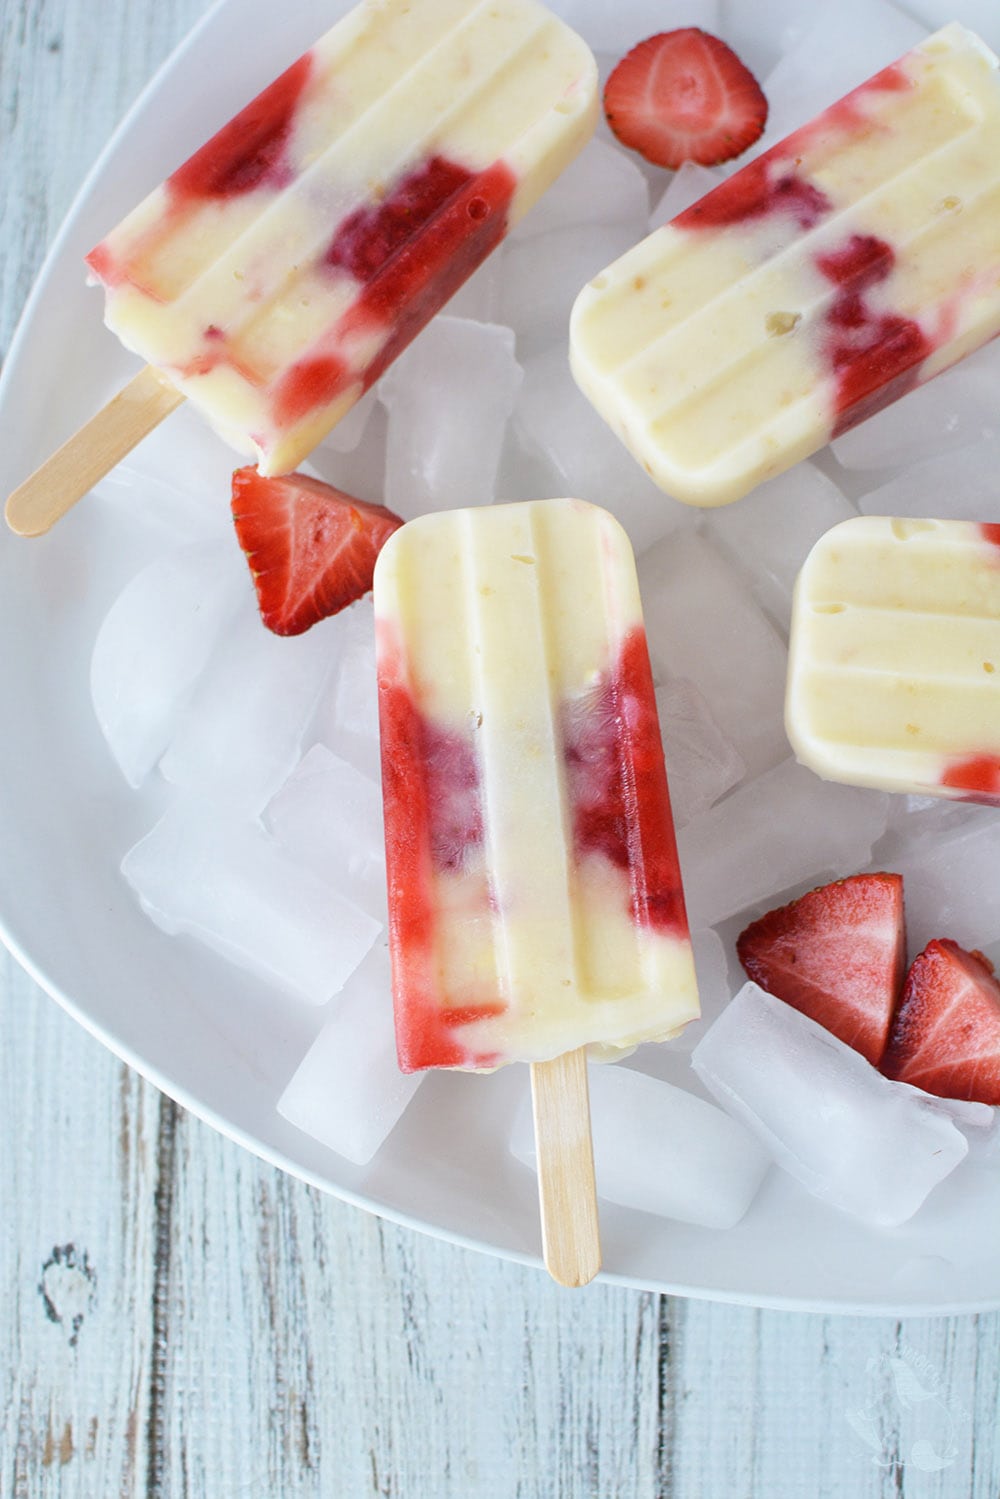 Homemade ice pops lying on a bed of ice with strawberries.